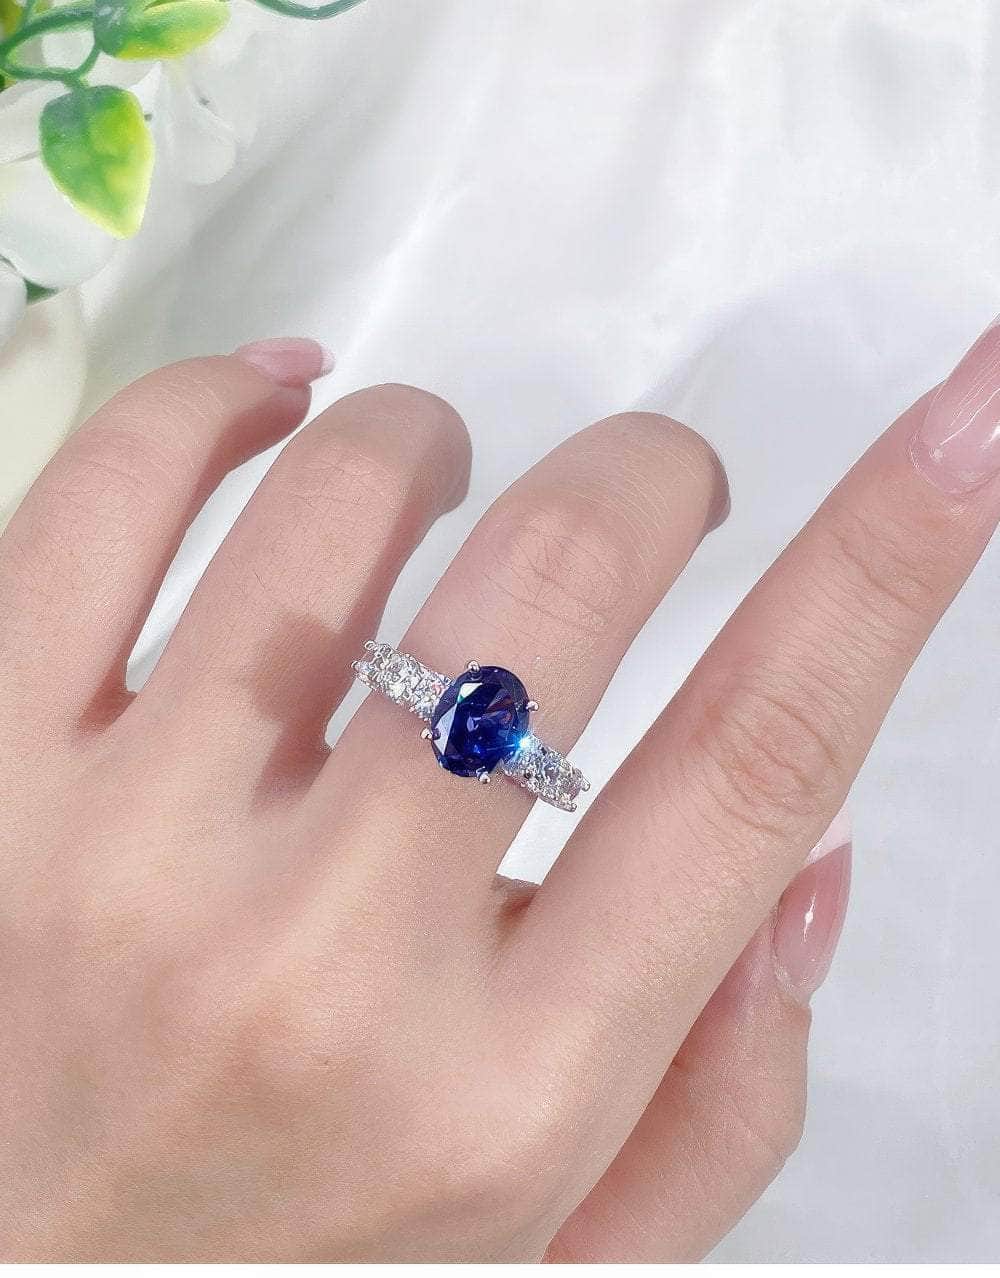 Sterling Silver Delicate Oval Cut Crystal Gemstone Ring